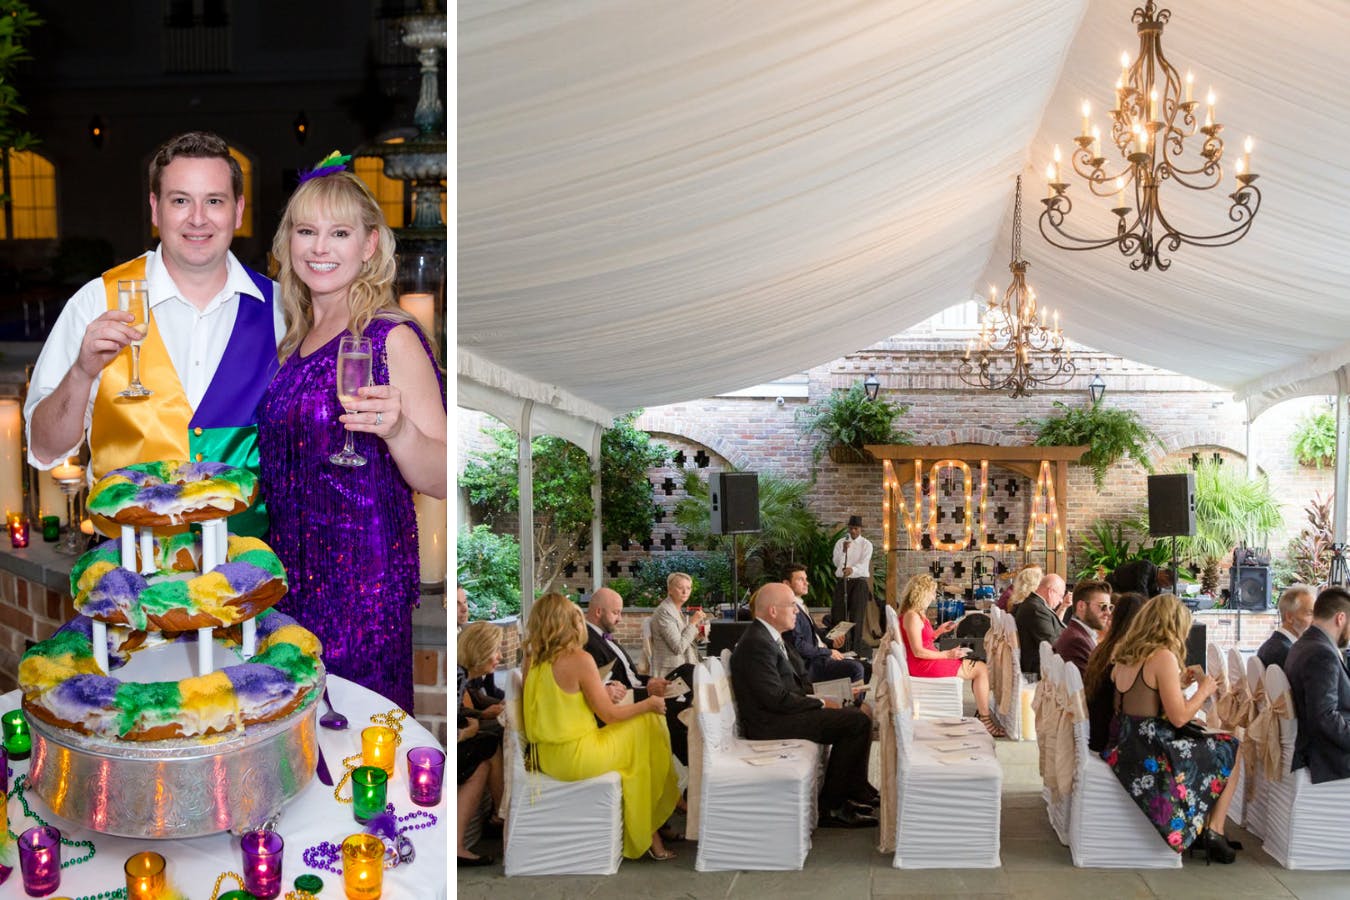 Mardi Gras themed wedding with King Cake | PartySlate